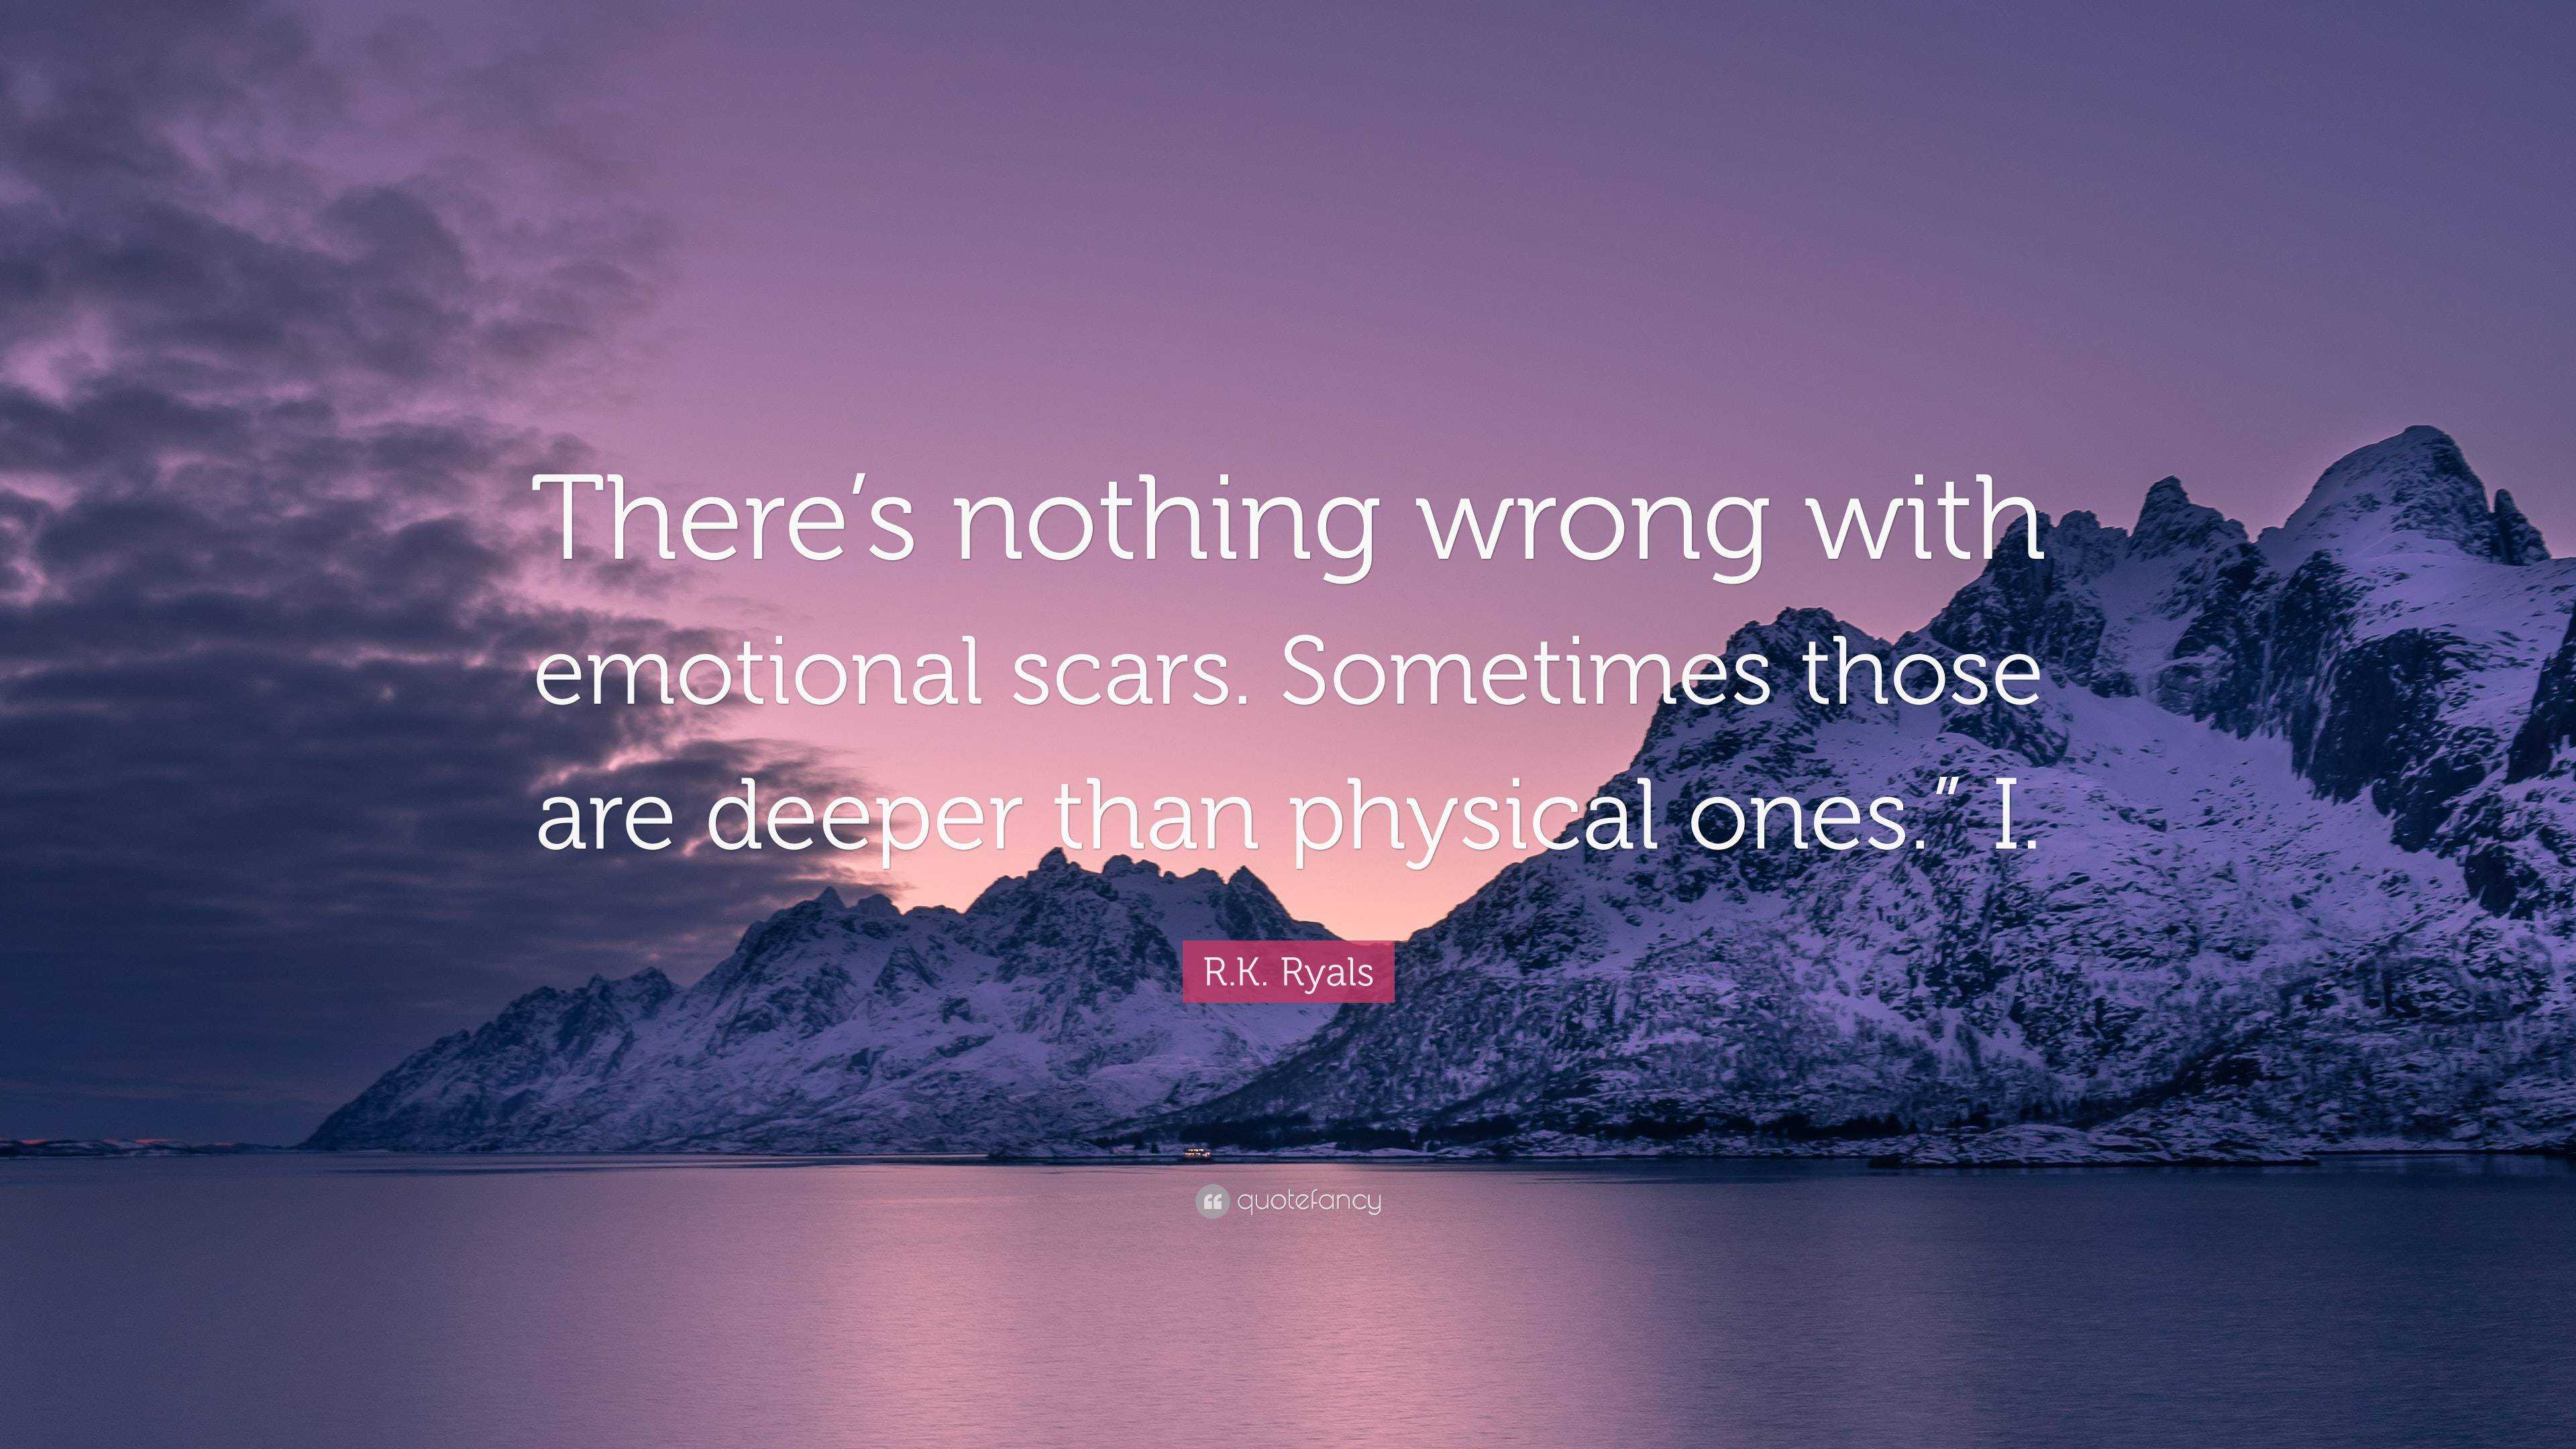 R.K. Ryals Quote: “There's nothing wrong with emotional scars. Sometimes  those are deeper than physical ones.”